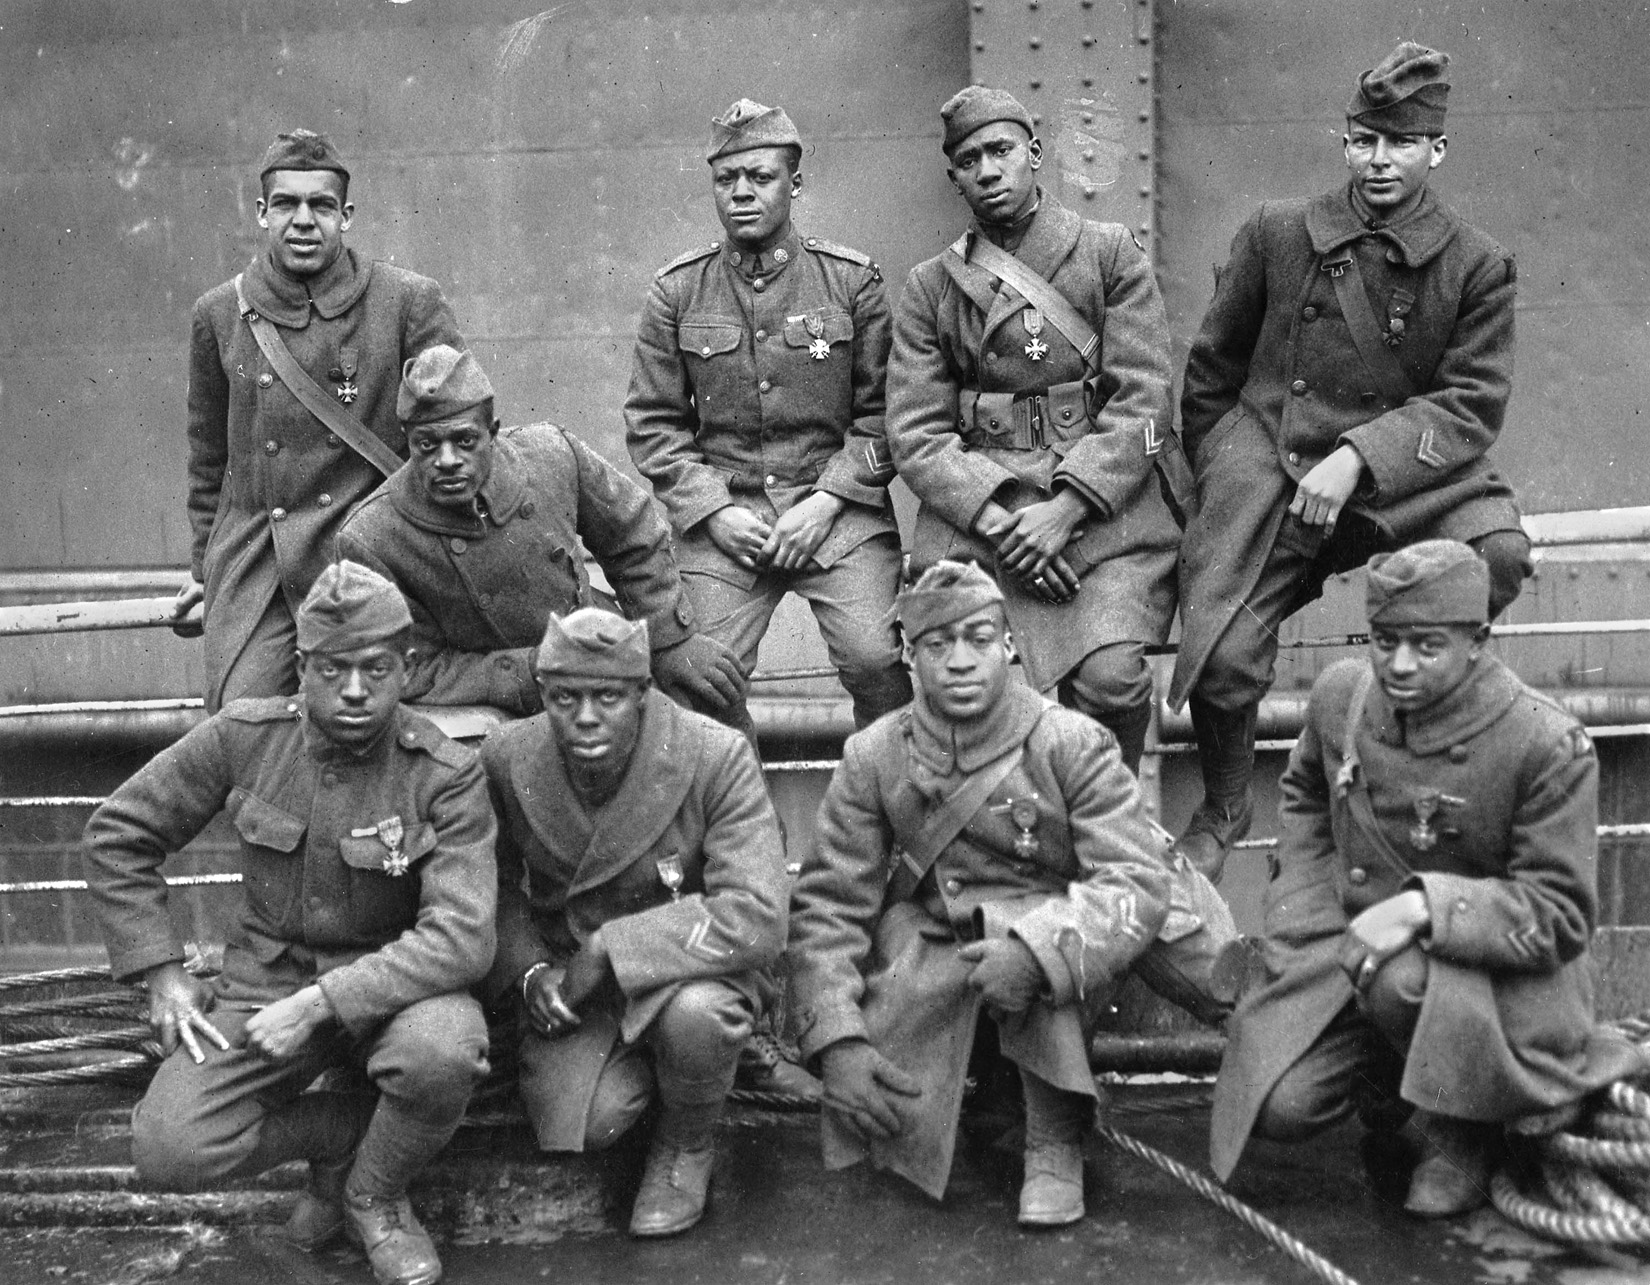 Group portrait of bravery. African American soldiers of the 369th Regiment (a New York element attached to the French Army) who were awarded the Croix de Guerre for gallantry in action in France in World War I. (L. to R., front row): Ed Williams, Herbert Taylor, Leon Fraitor, Ralph Hawkins. (Back row): H.D. Prinas, Dan Stroms, Joe Williams, Alfred Hanley, T.W. Taylor.